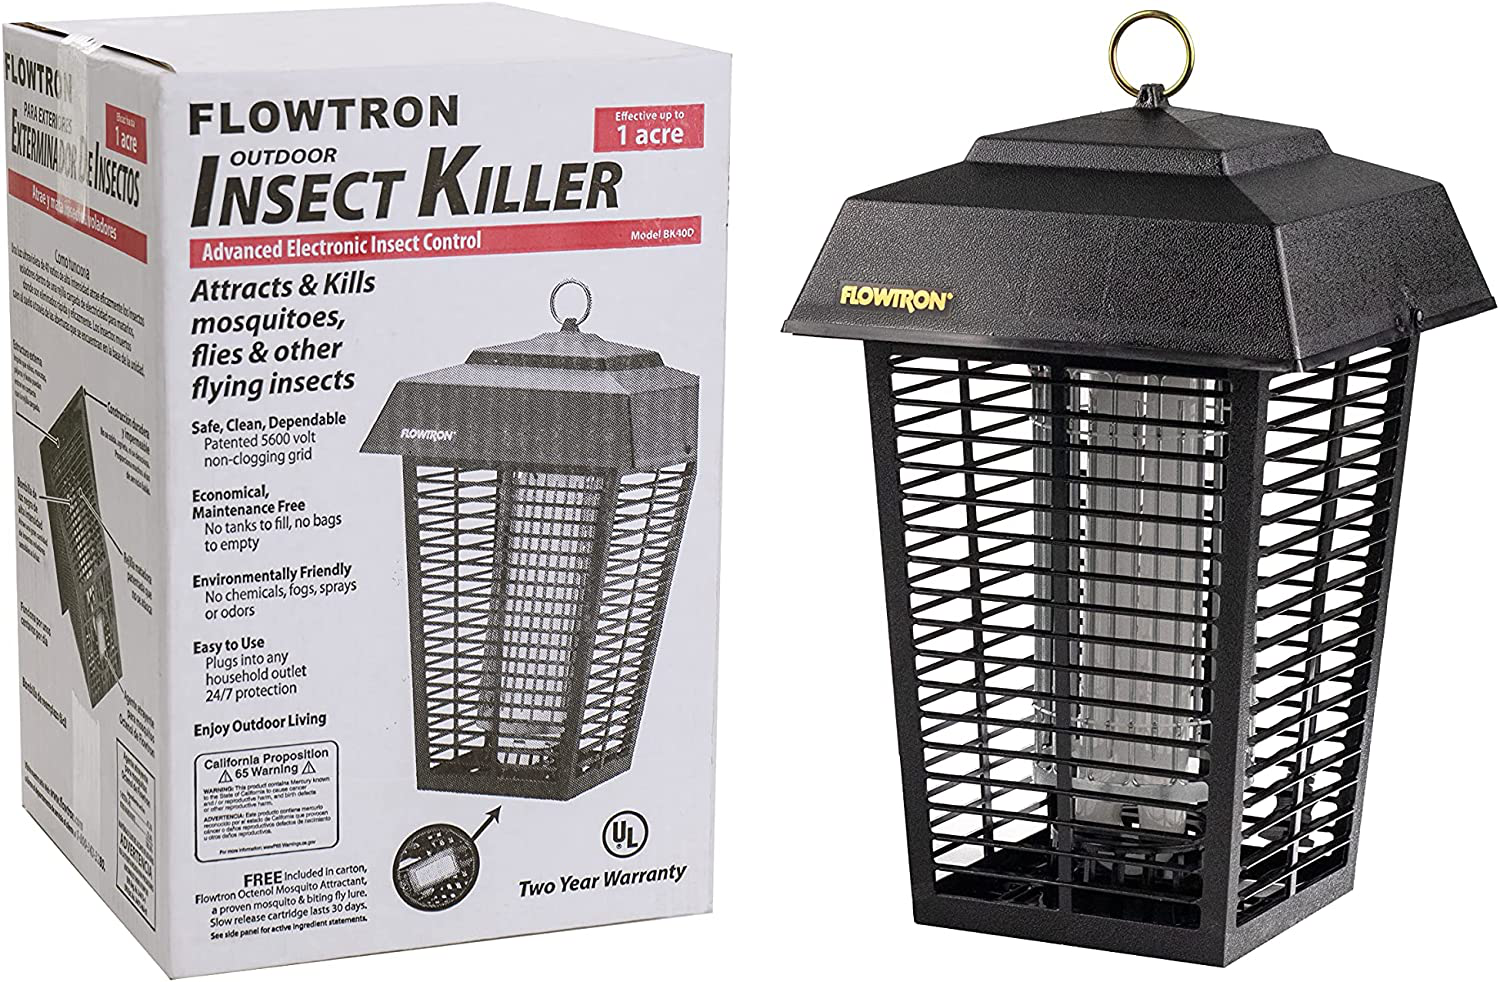 Flowtron BK-40D Electronic Insect Killer, 1 Acre Coverage,Black & BF-190 Replacement Bulb for BK-40D